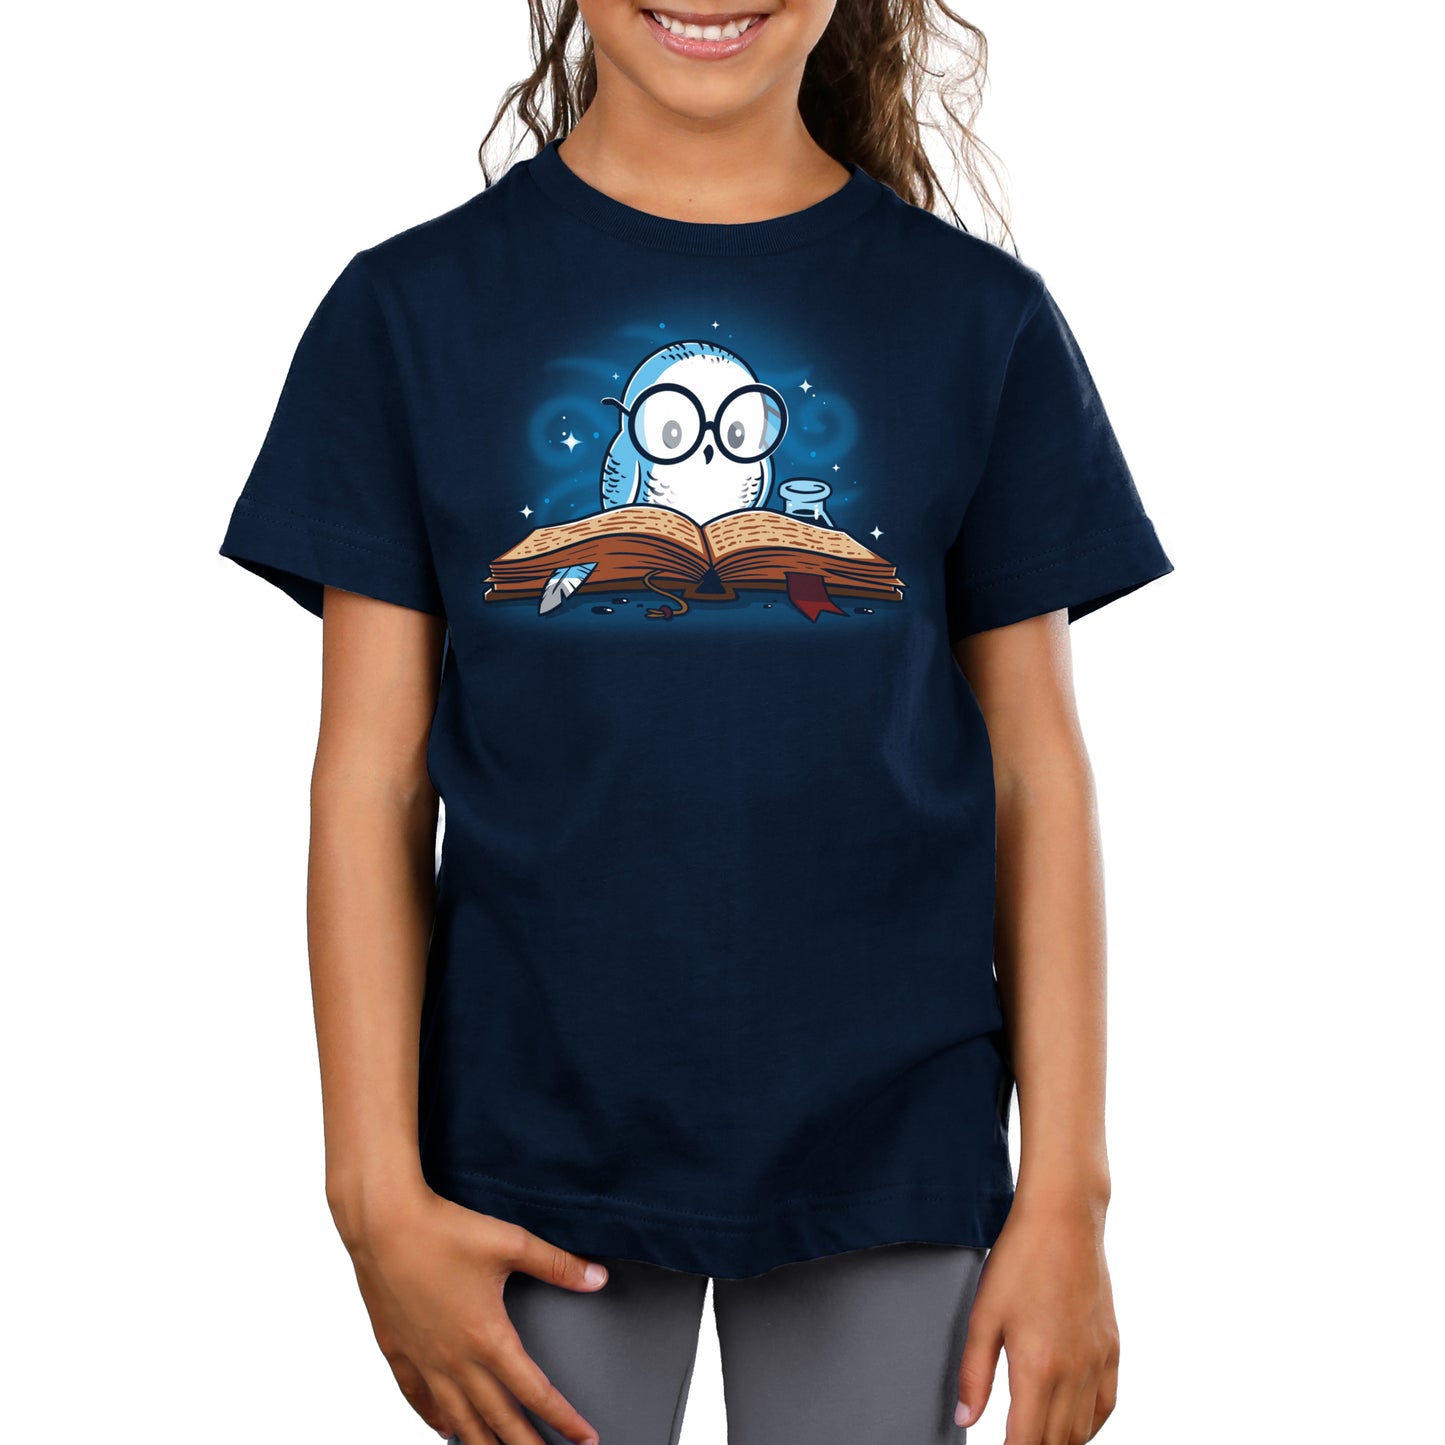 A girl wearing a navy blue TeeTurtle original "Reading is Magical" t-shirt with an image of an owl reading a book.